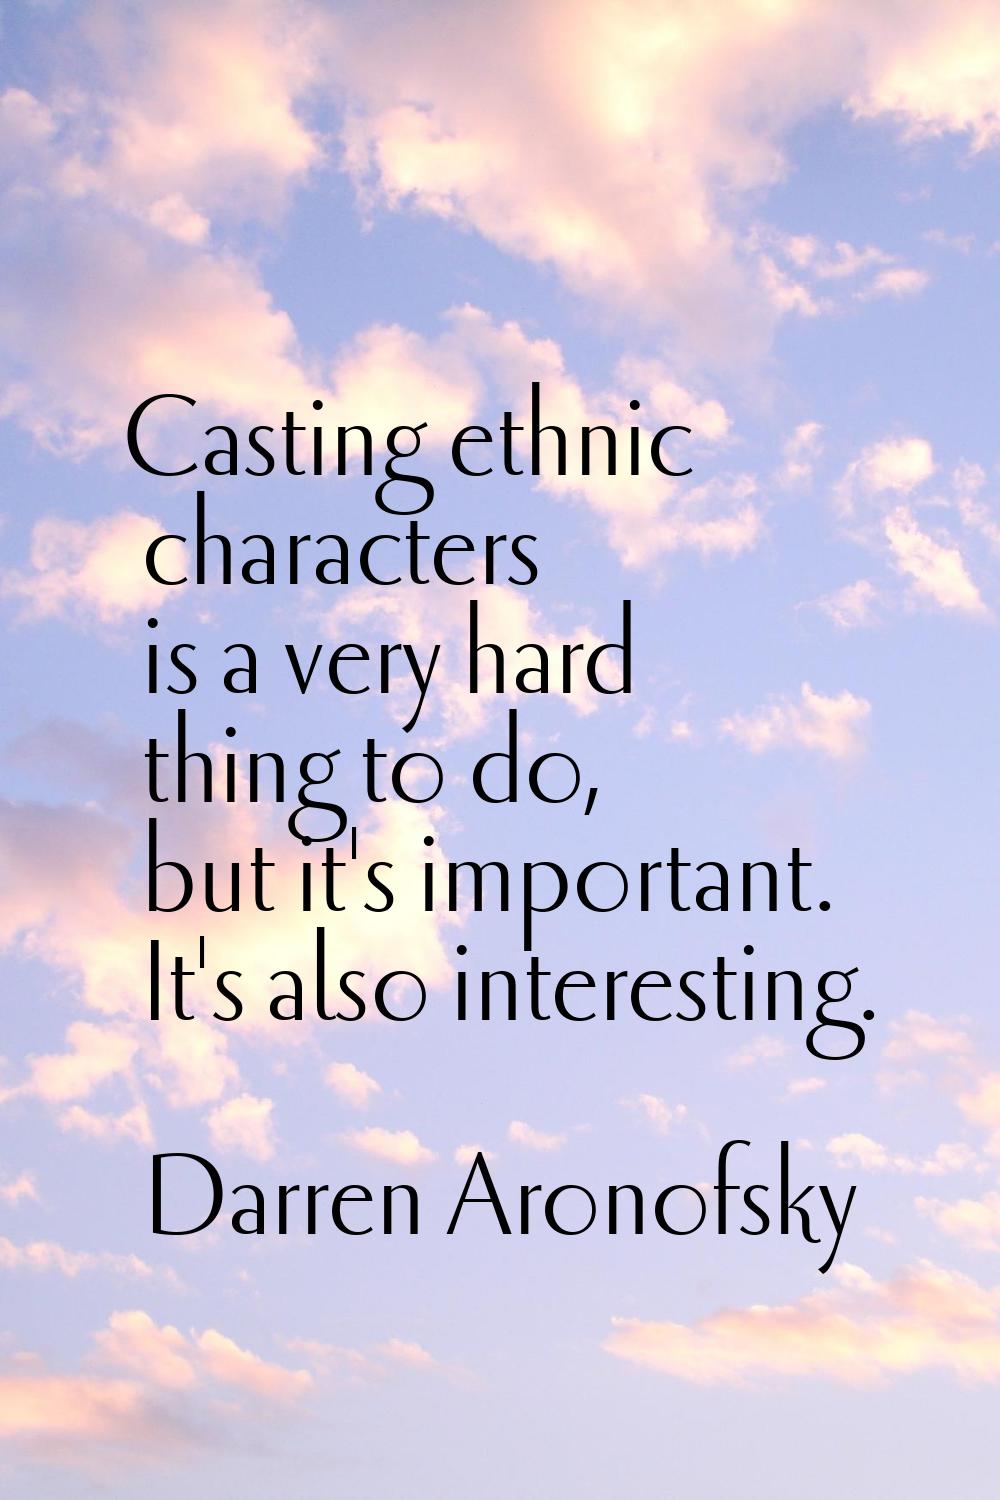 Casting ethnic characters is a very hard thing to do, but it's important. It's also interesting.